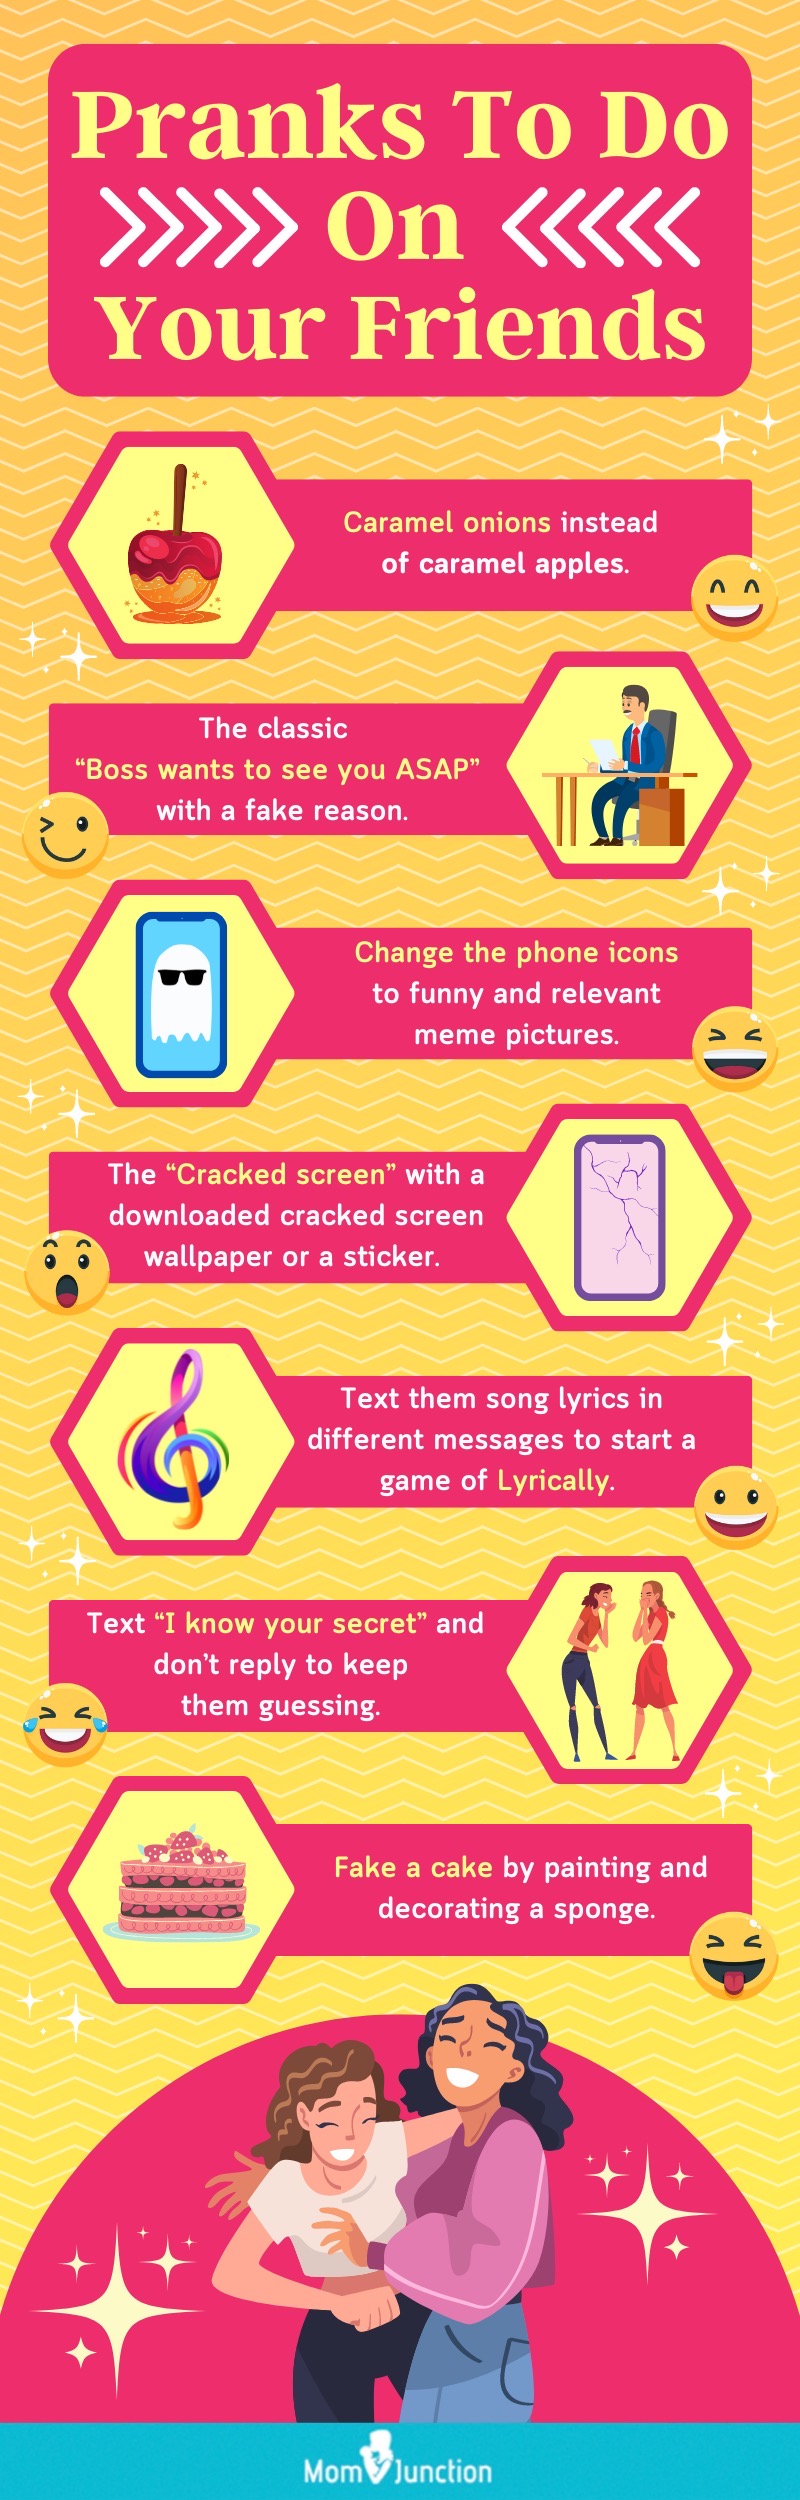 pranks to do on your friends [infographic]